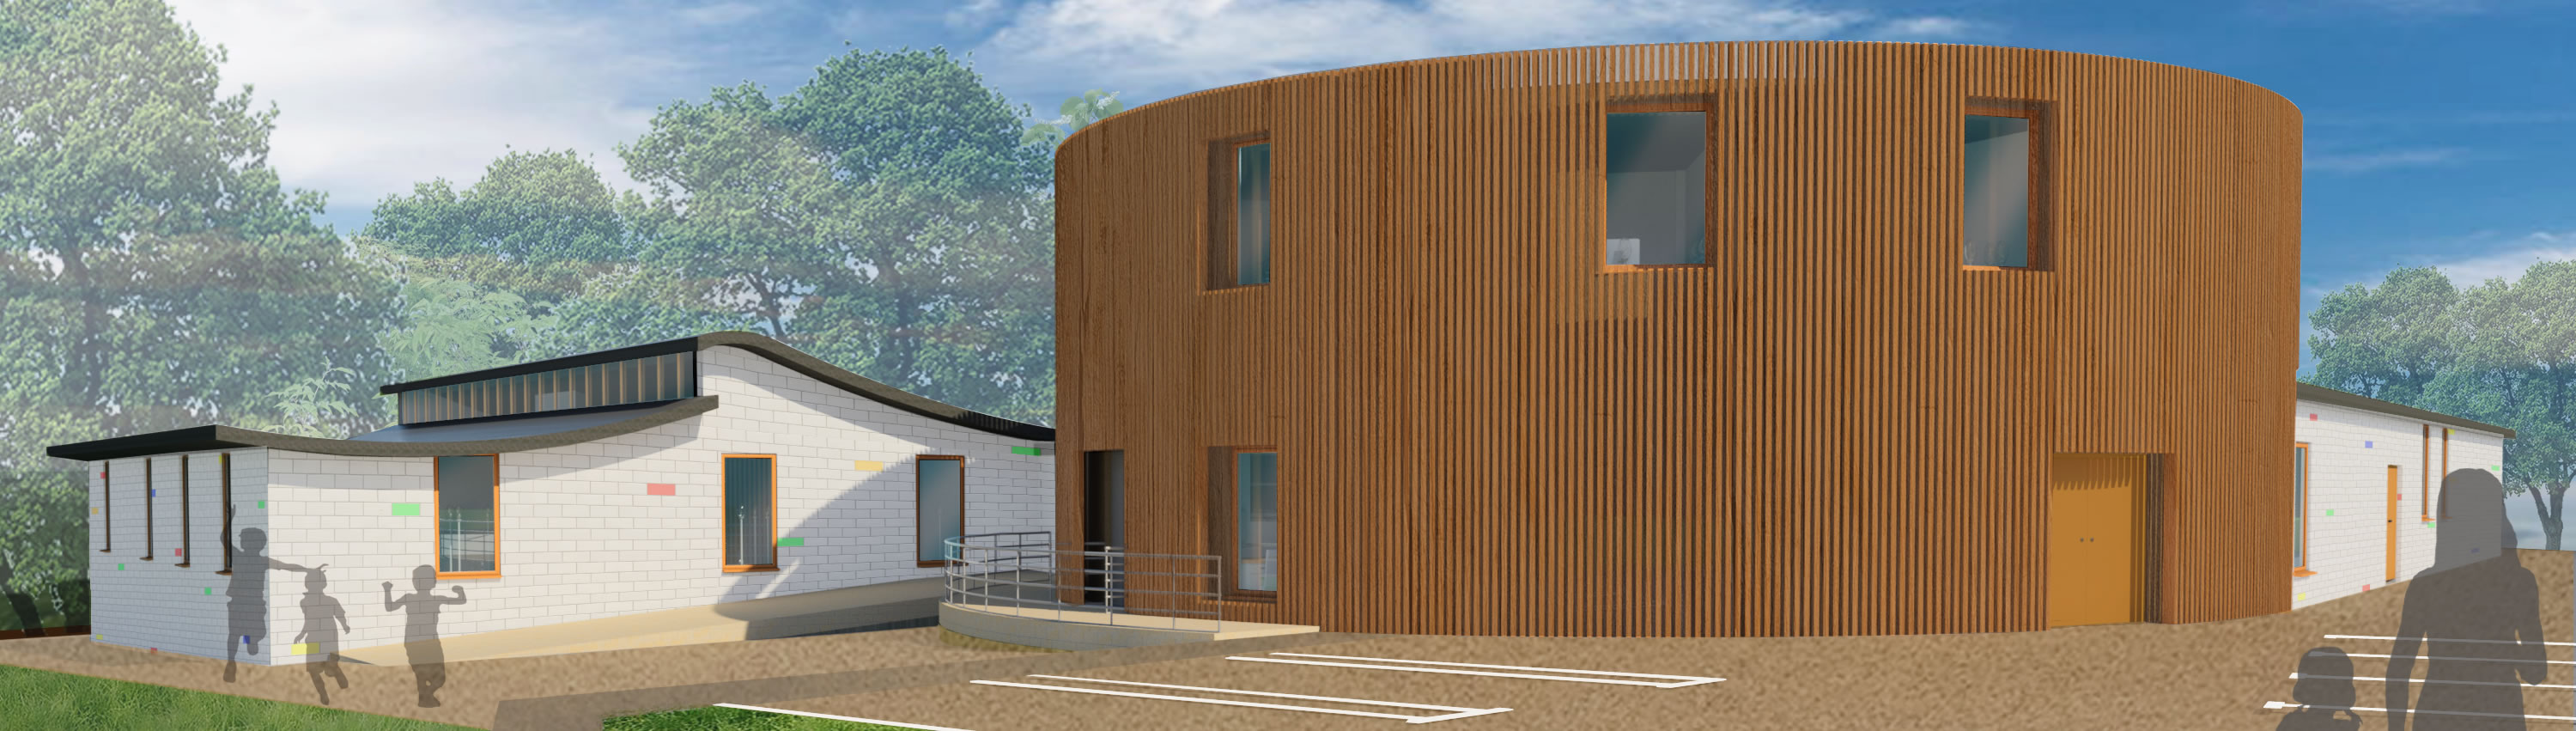 Solent student, April Rapley's design of Chandlers Ford Infant School, which won a high commendation at the awards